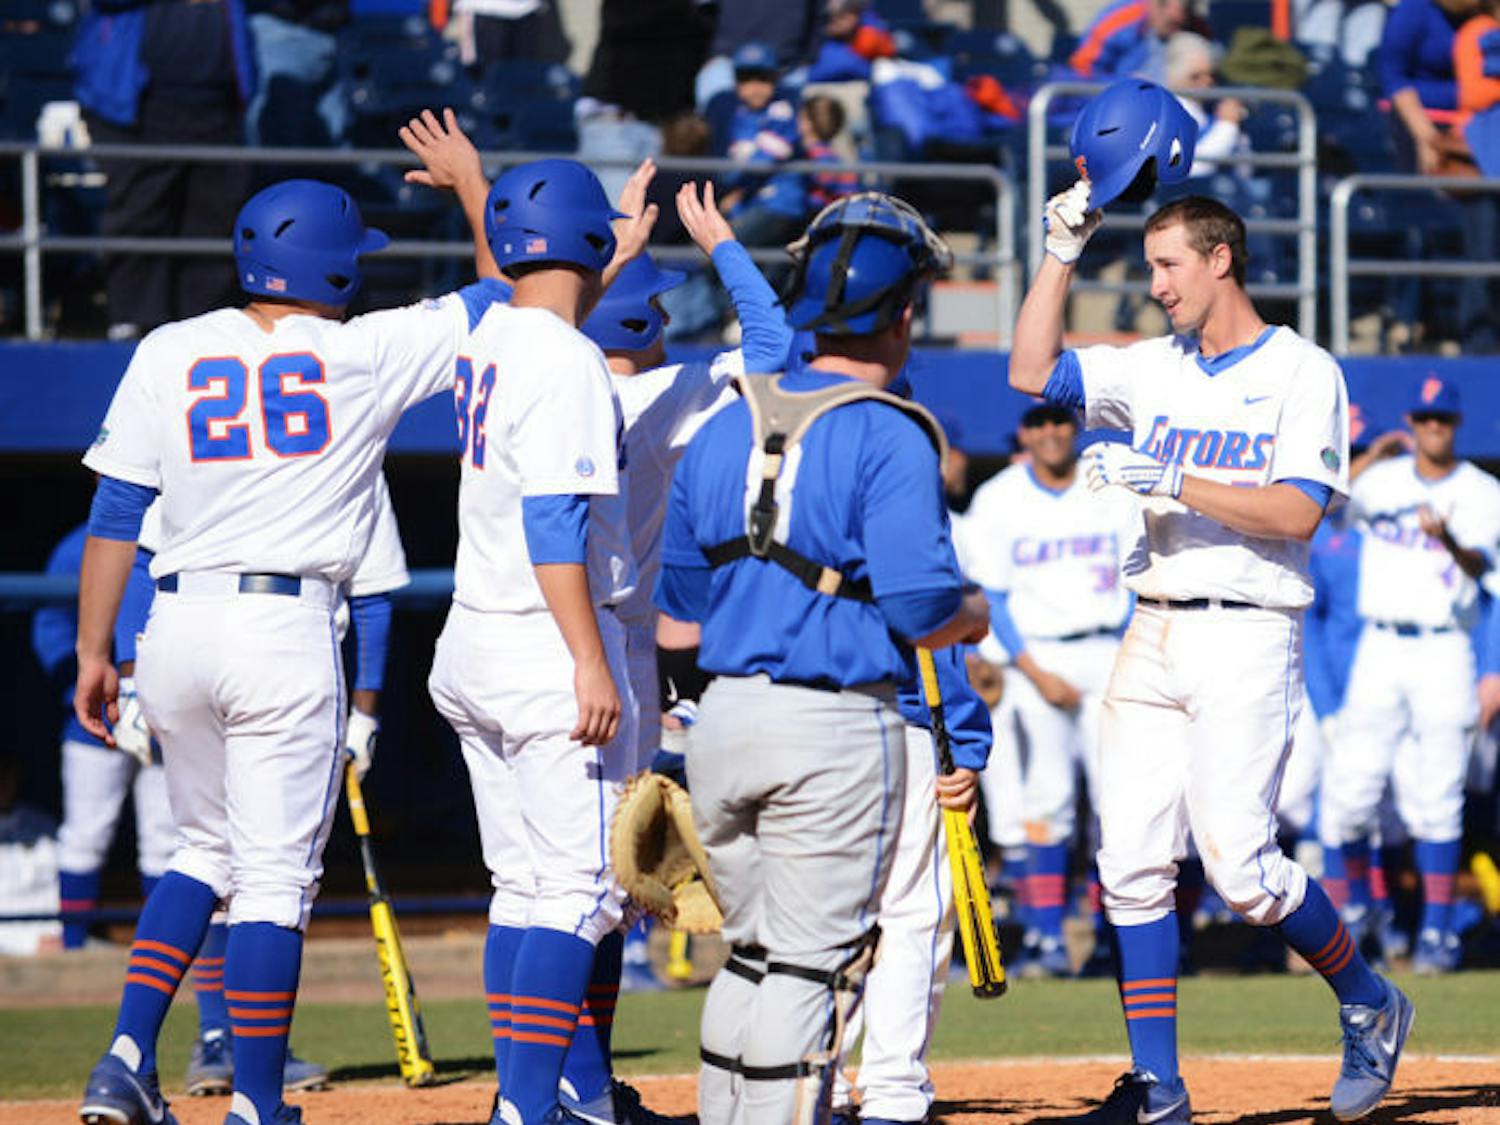 Sophomore Zack Powers is congratulated by teammates at home plate after hitting his second grand slam during Florida’s 16-5 win against Duke on Feb. 17 at McKethan Stadium.
&nbsp;